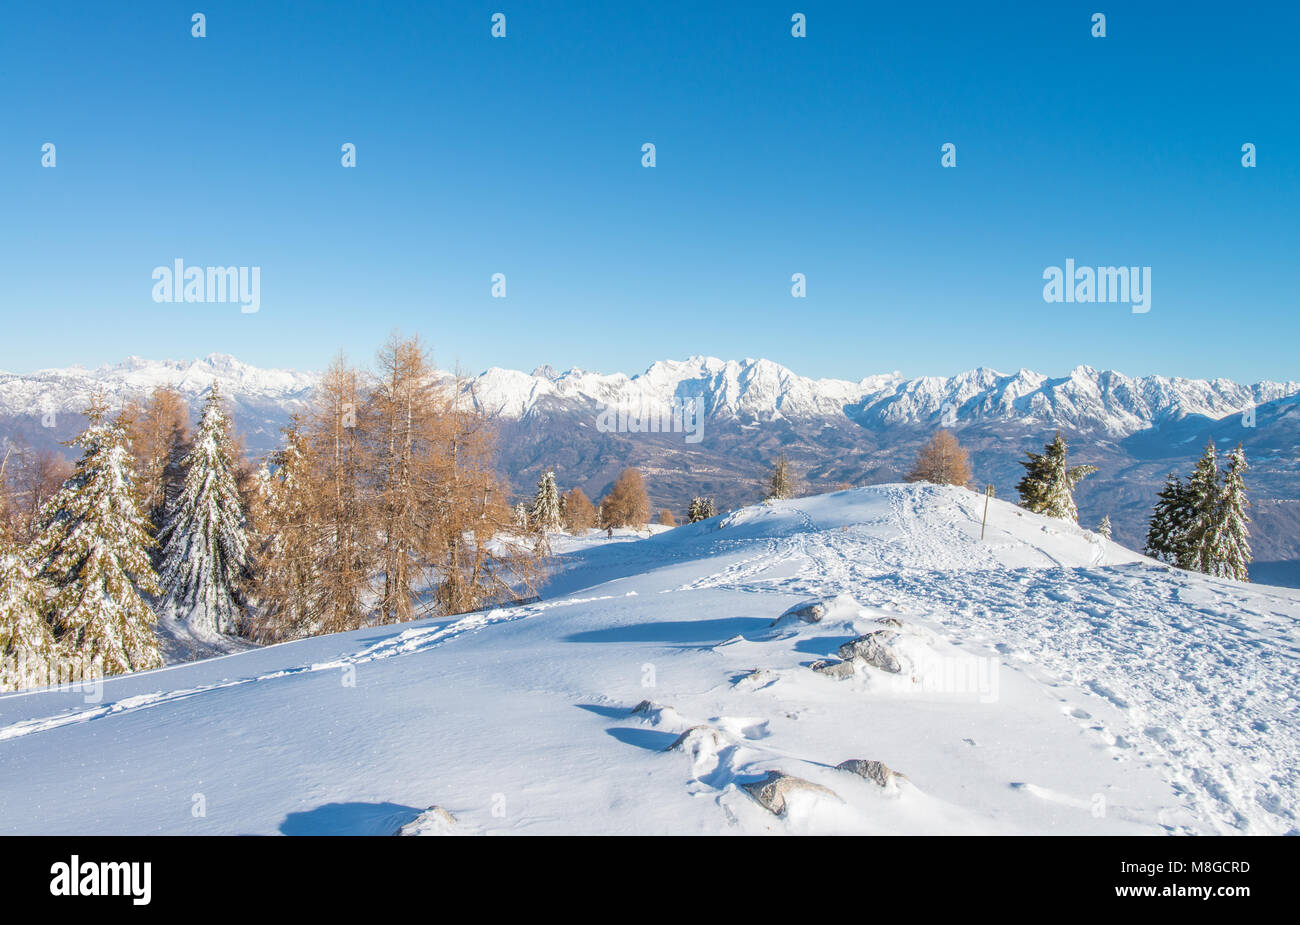 Amazing view of the snowcapped Dolomites from a little snowy mound. Trees, forest in the foreground, the valley and city at the bottom. Stock Photo